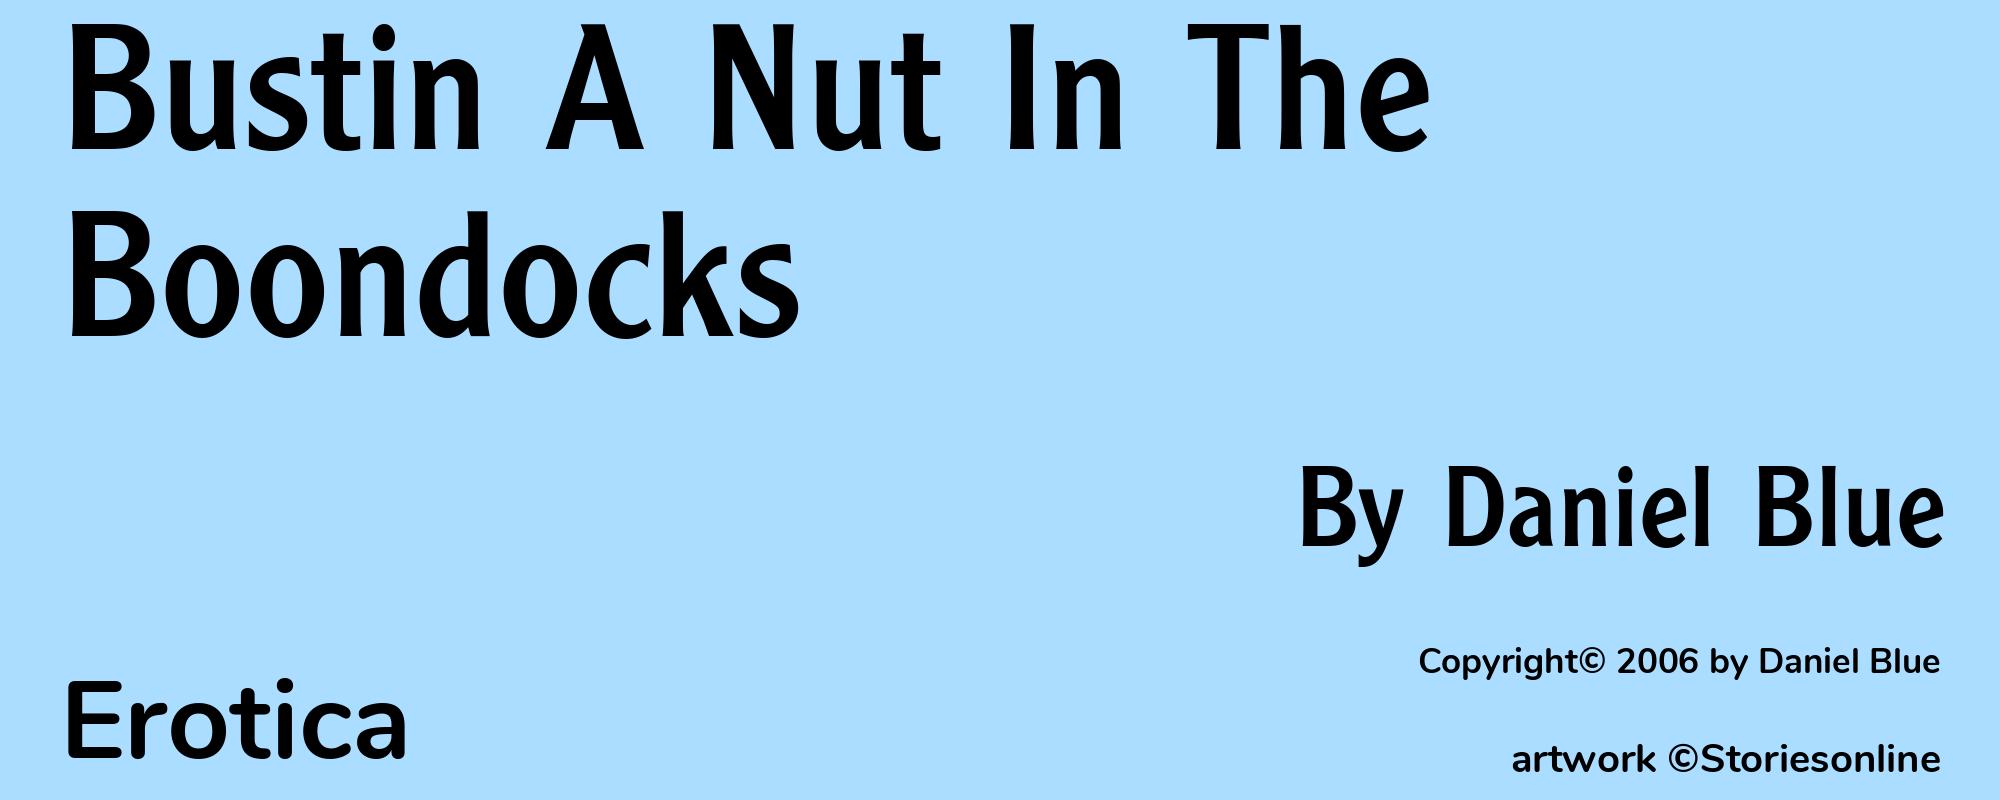 Bustin A Nut In The Boondocks - Cover